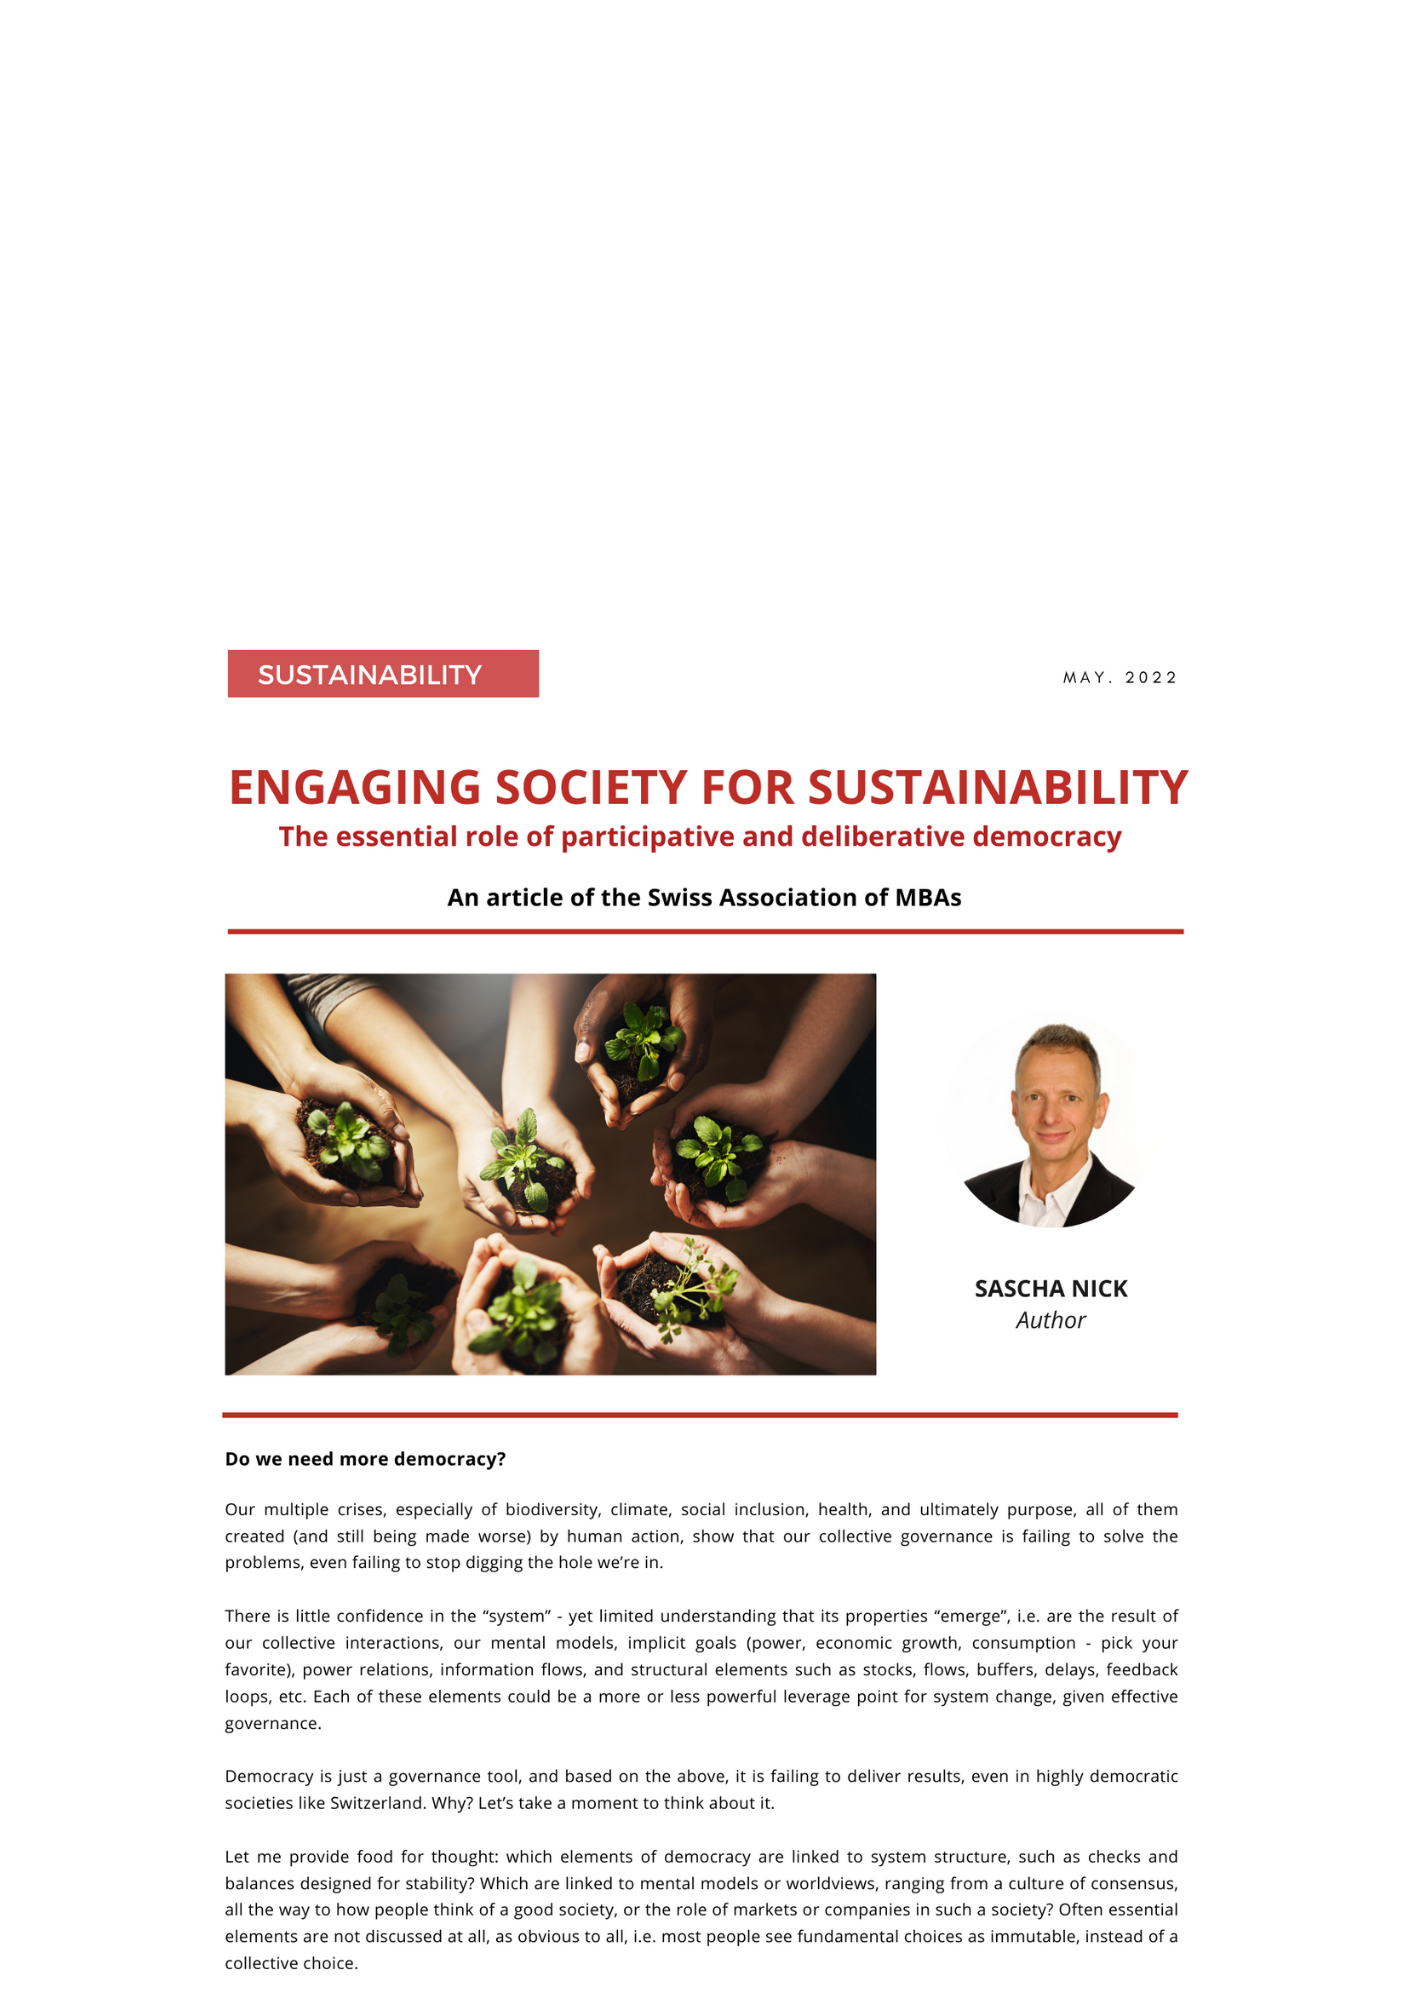 ENGAGING SOCIETY FOR SUSTAINABILITY - The essential role of participative and deliberative democracy